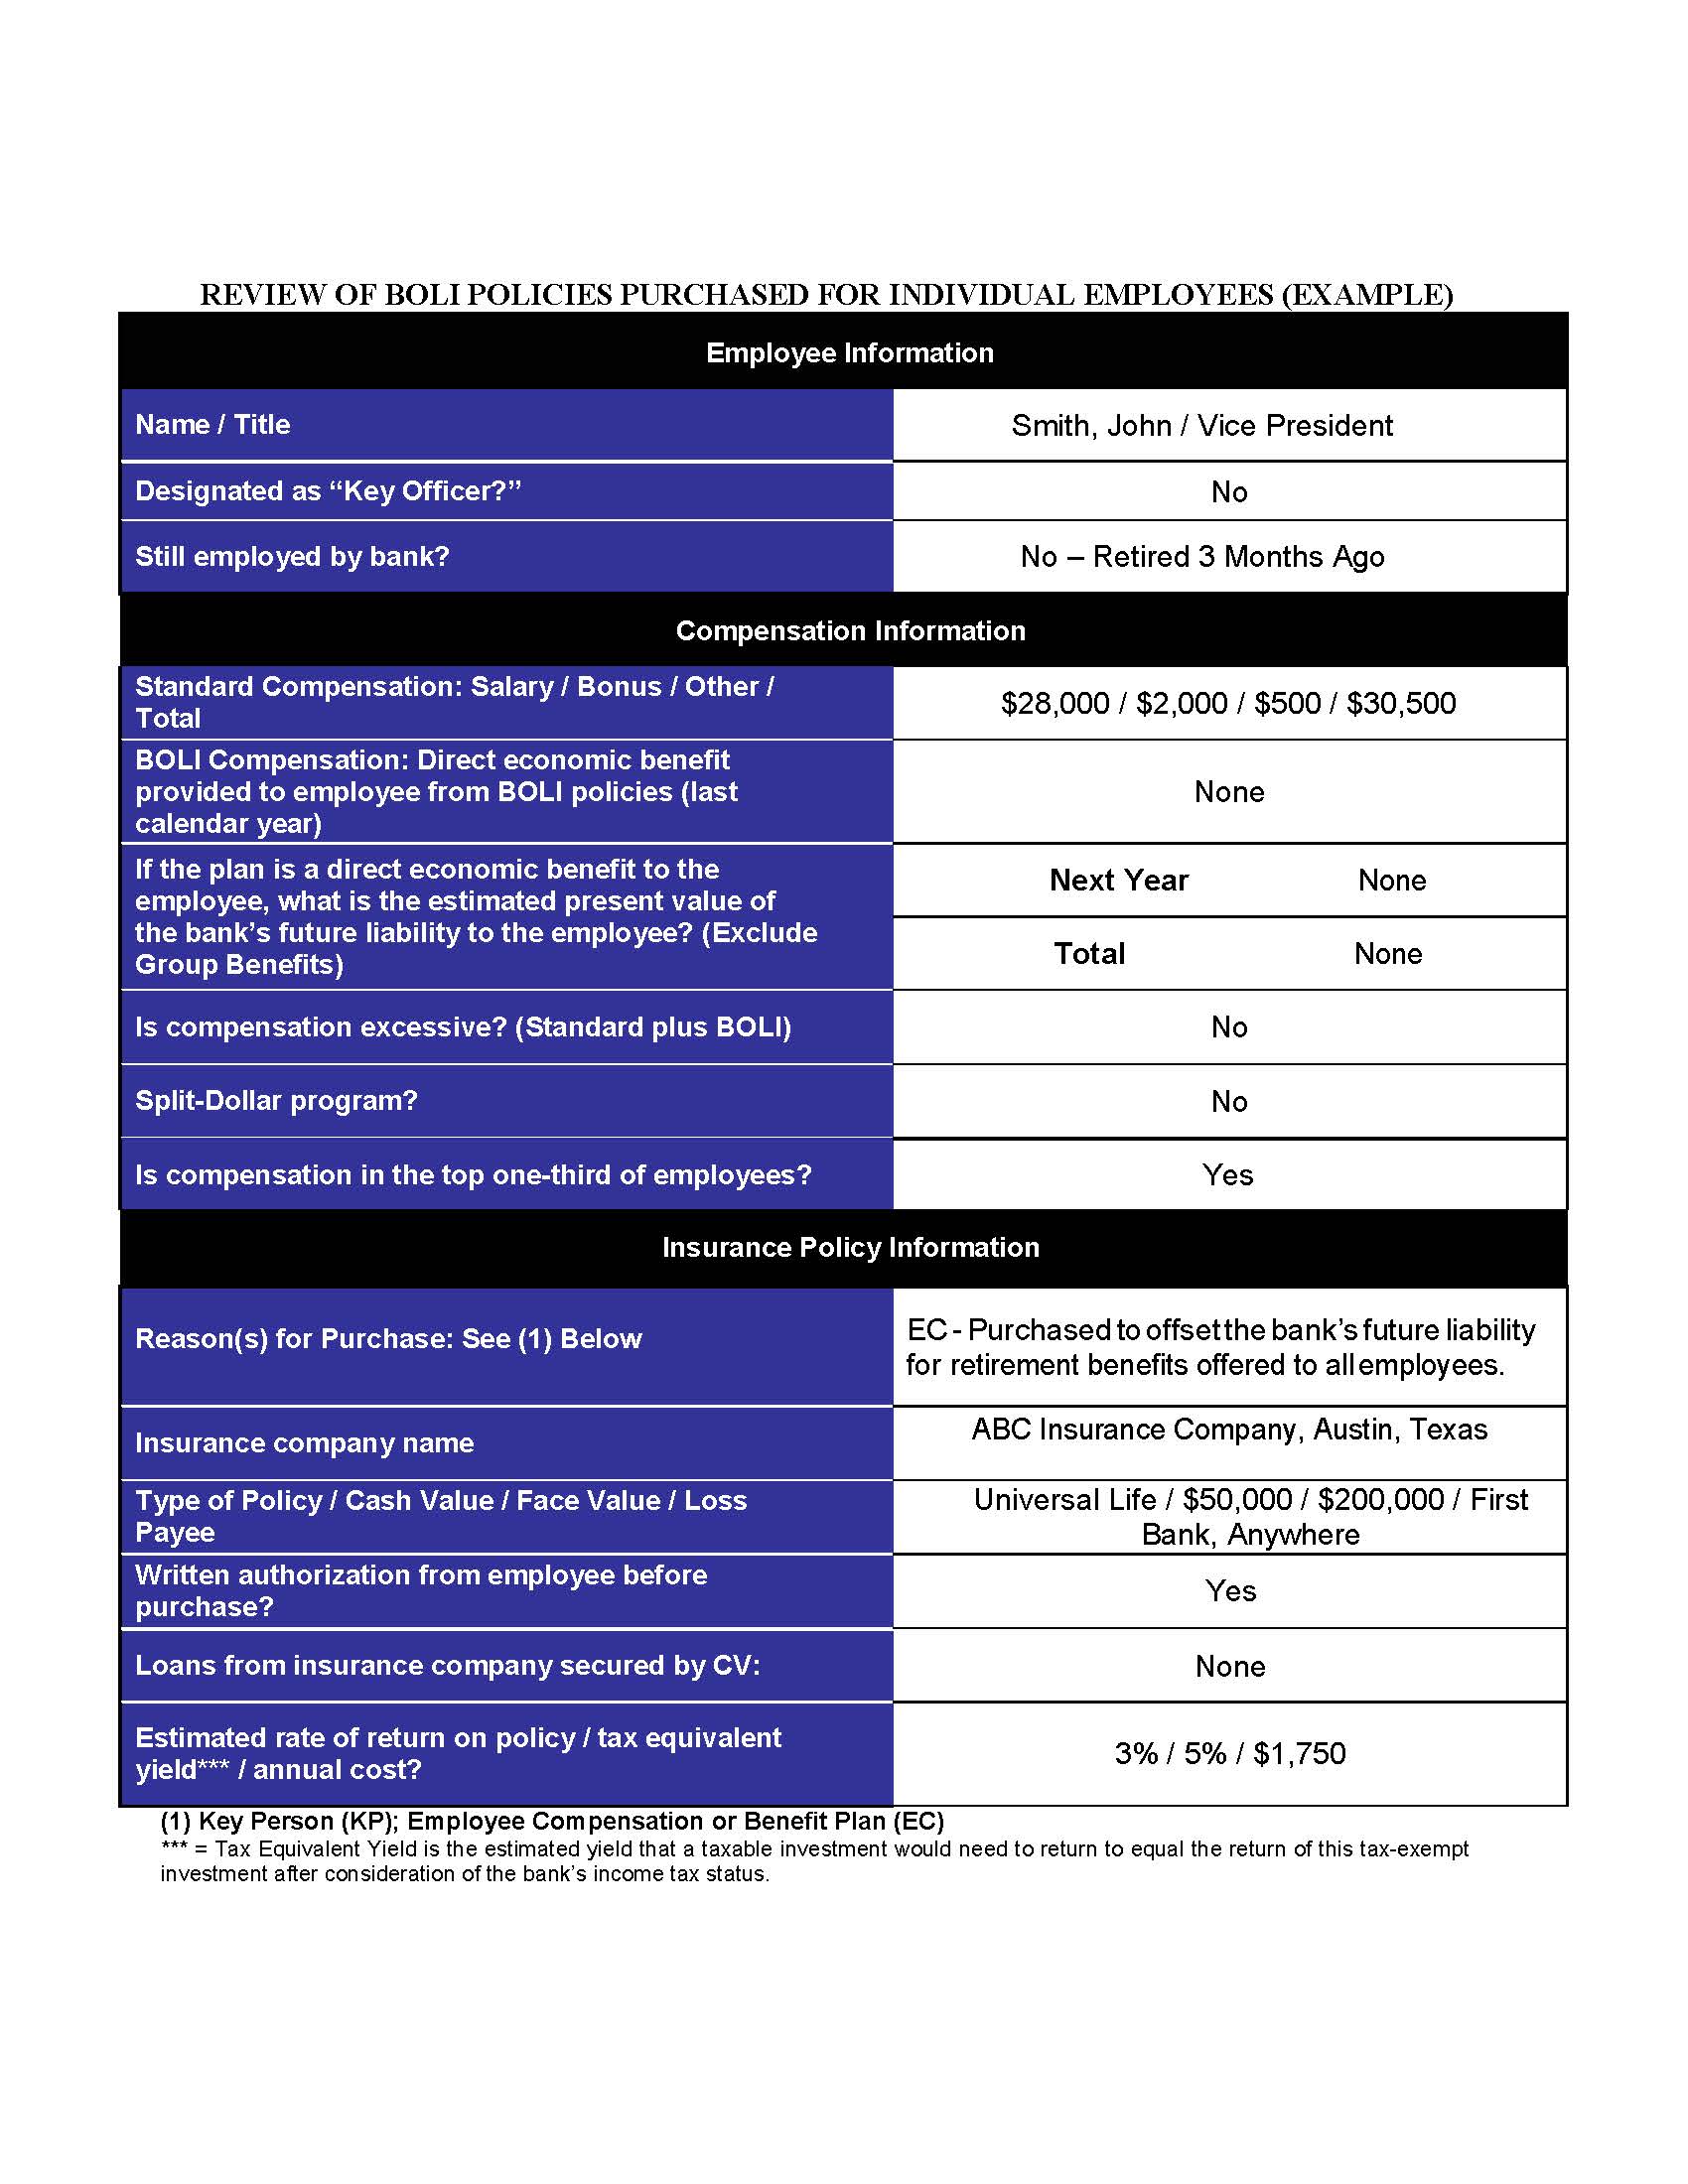 Table of Review of Policies Purchased for Individuals